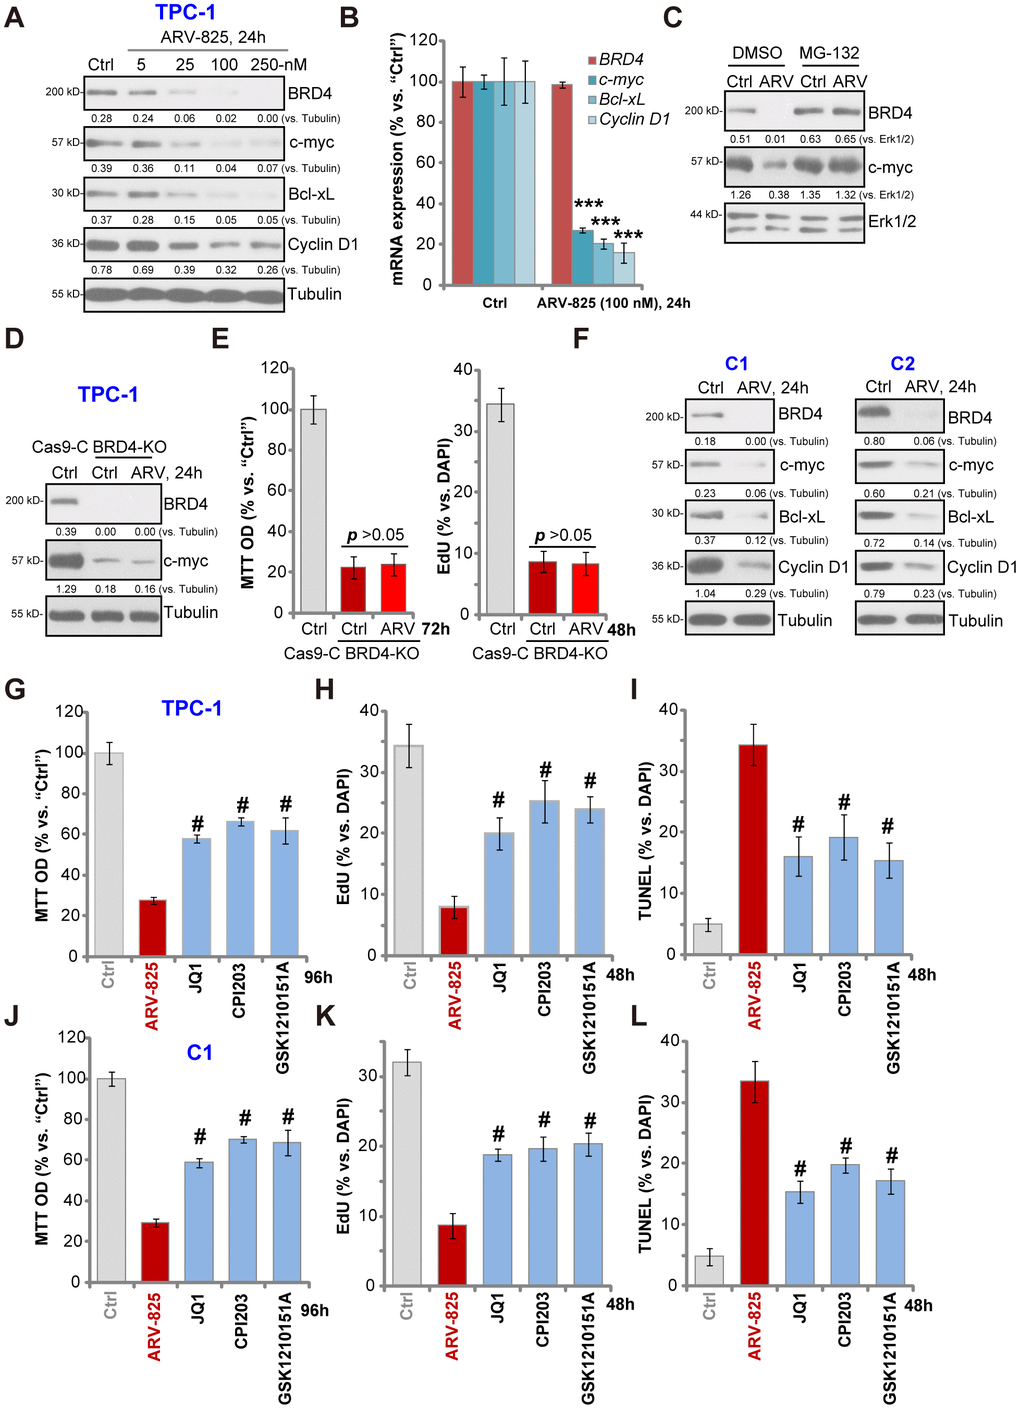 ARV-825 inhibits BRD4 signaling in human thyroid carcinoma cells. TPC-1 cells (A and B) or the primary human thyroid carcinoma cells (“C1”/“C2”) (F) were treated with applied concentration of ARV-825 for 24h, tested by Western blotting and qPCR assays of listed genes. TPC-1 cells were pre-treated with MG-132 (25 μM) for 2h, followed by ARV-825 (100 nM) treated for 24h, expression of listed proteins was shown (C). The stable TPC-1 cells with CRISPR/Cas9 BRD4-KO construct (“BRD4-KO”) cells were treated with or without ARV-825 (100 nM, for indicated time periods), control TPC-1 cells with empty vector (“Cas9-C”) were left untreated; expression of listed proteins was shown (D); Cell viability and proliferation were tested by MTT and EdU staining assays (E), respectively. TPC-1 cells or “C1” human thyroid carcinoma cells were treated with ARV-825 (100 nM), JQ1 (500 nM), CPI203 (500 nM) or GSK1210151A (500 nM) for indicated time periods, cell viability (MTT assay, 96h) (G and J), proliferation (testing nuclear EdU/DAPI ratio, 48h) (H and K) and apoptosis (nuclear TUNEL ratio, 48h) (I and L) were tested, and results were quantified. Expression of listed proteins was quantified and normalized to the corresponding loading control (A, C, D and F). #p vs. “ARV-825” treatment group (G–L). The experiments were repeated three times, and similar results obtained.